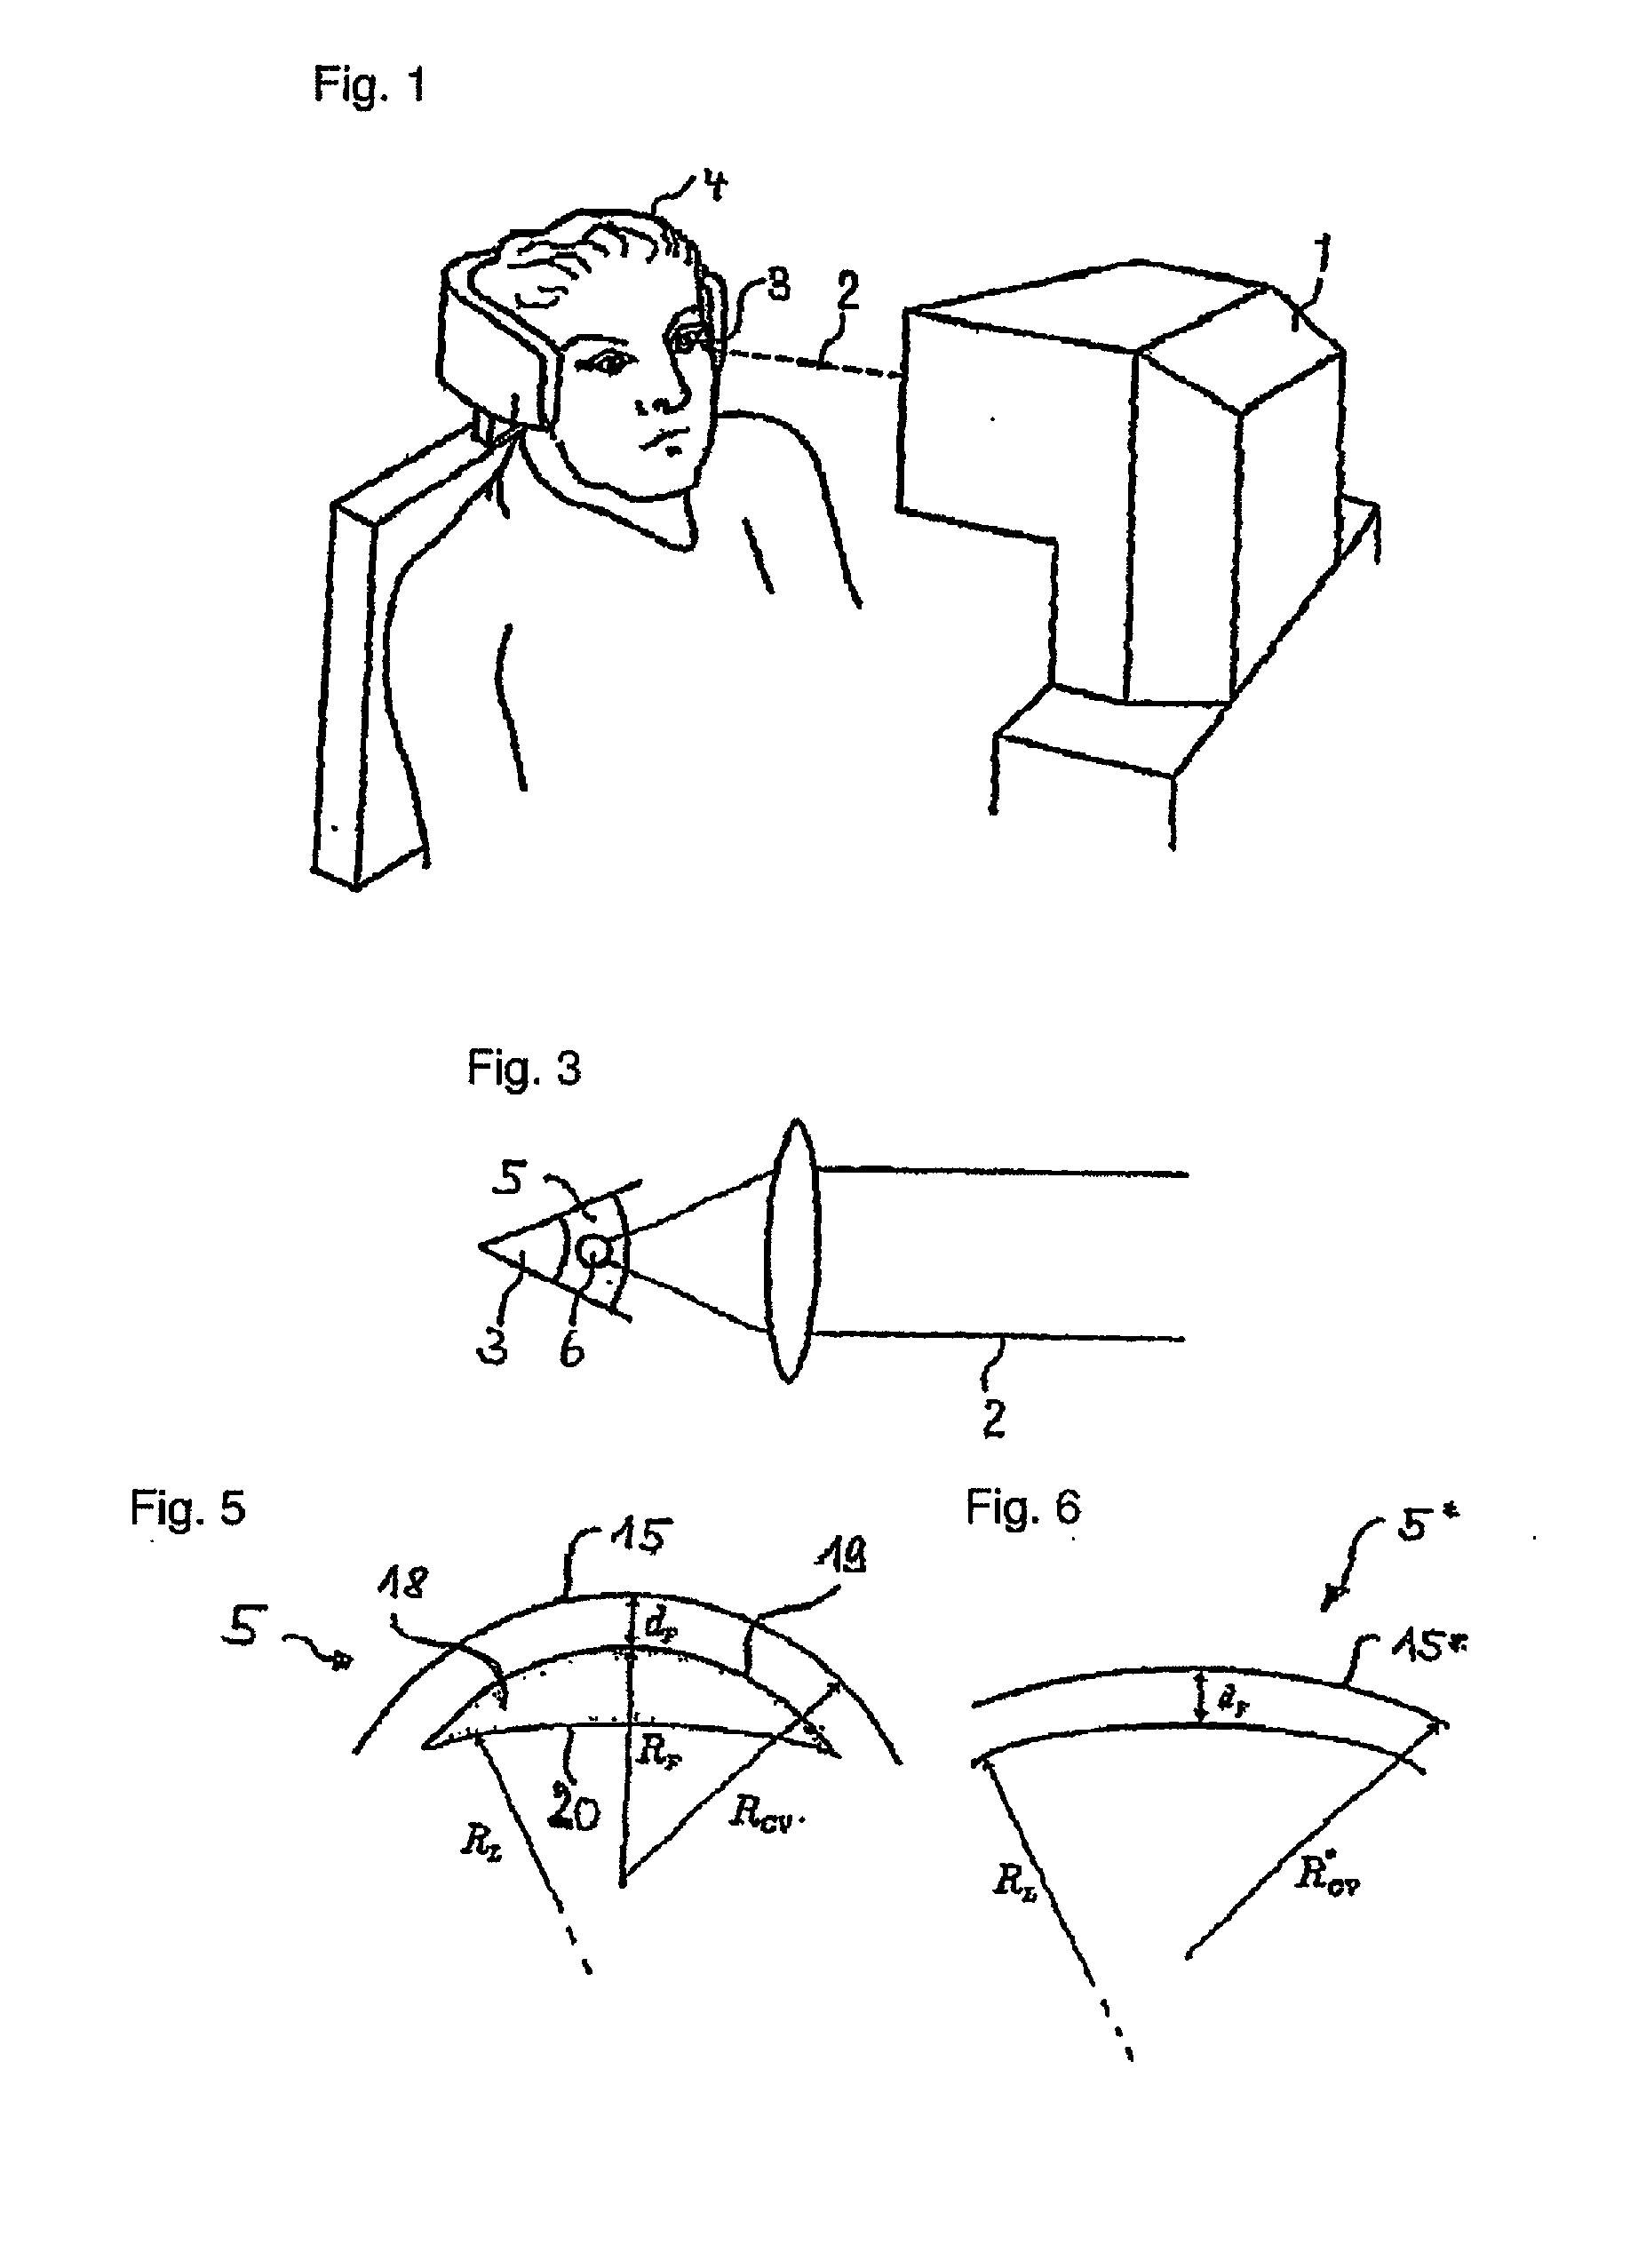 Treatment device for the surgical correction of defective vision of an eye, method for producing control data therefor, and method for the surgical correction of defective vision of an eye